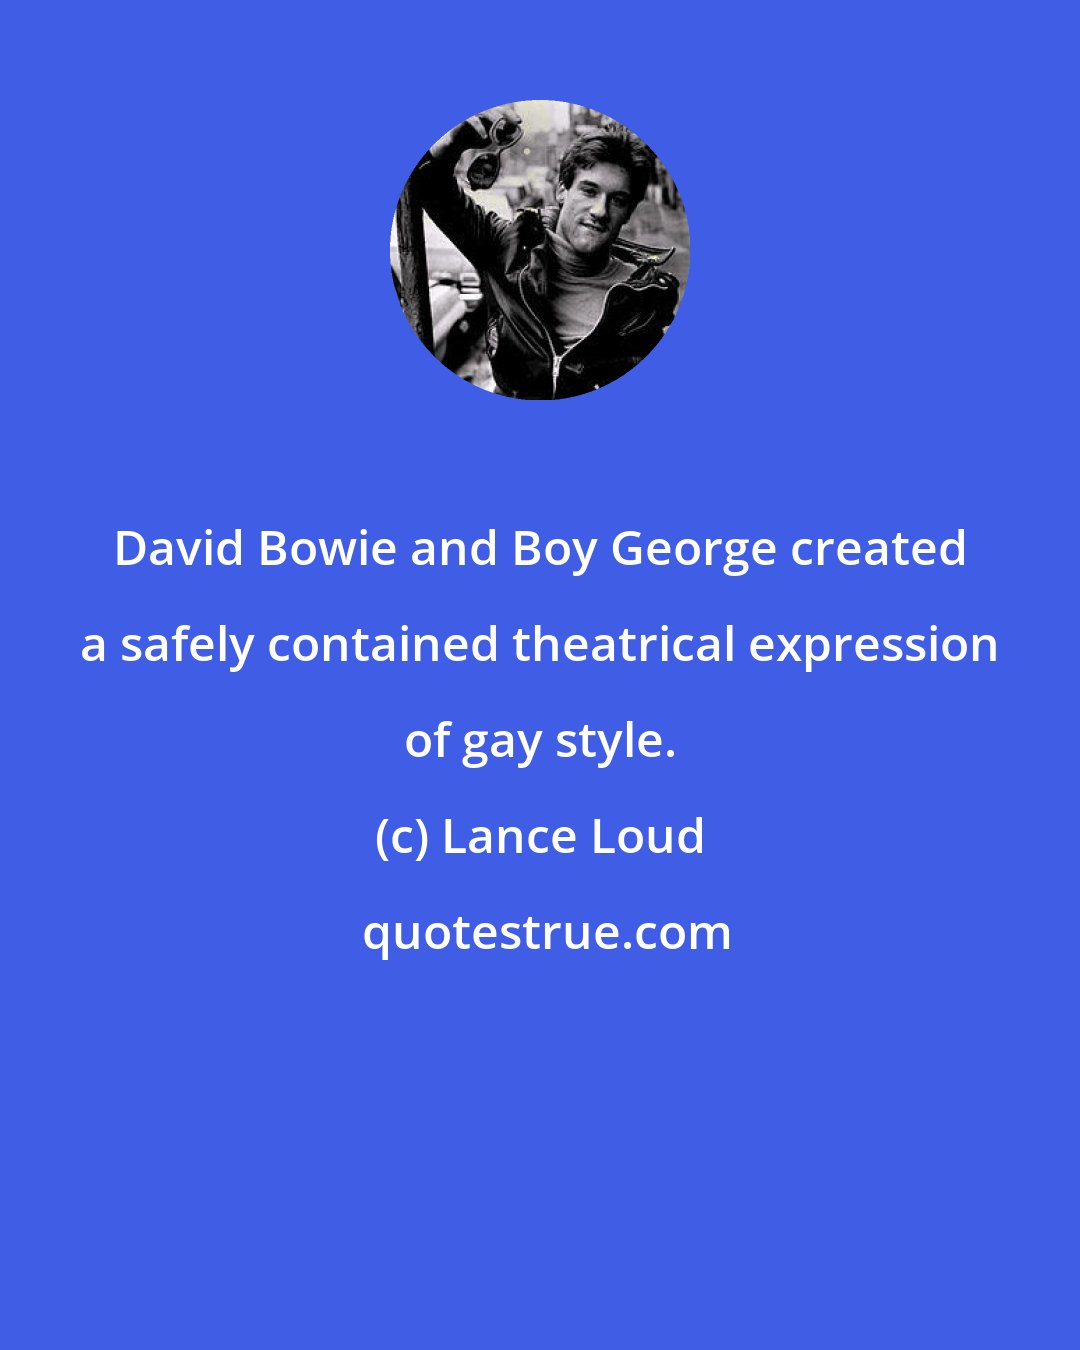 Lance Loud: David Bowie and Boy George created a safely contained theatrical expression of gay style.